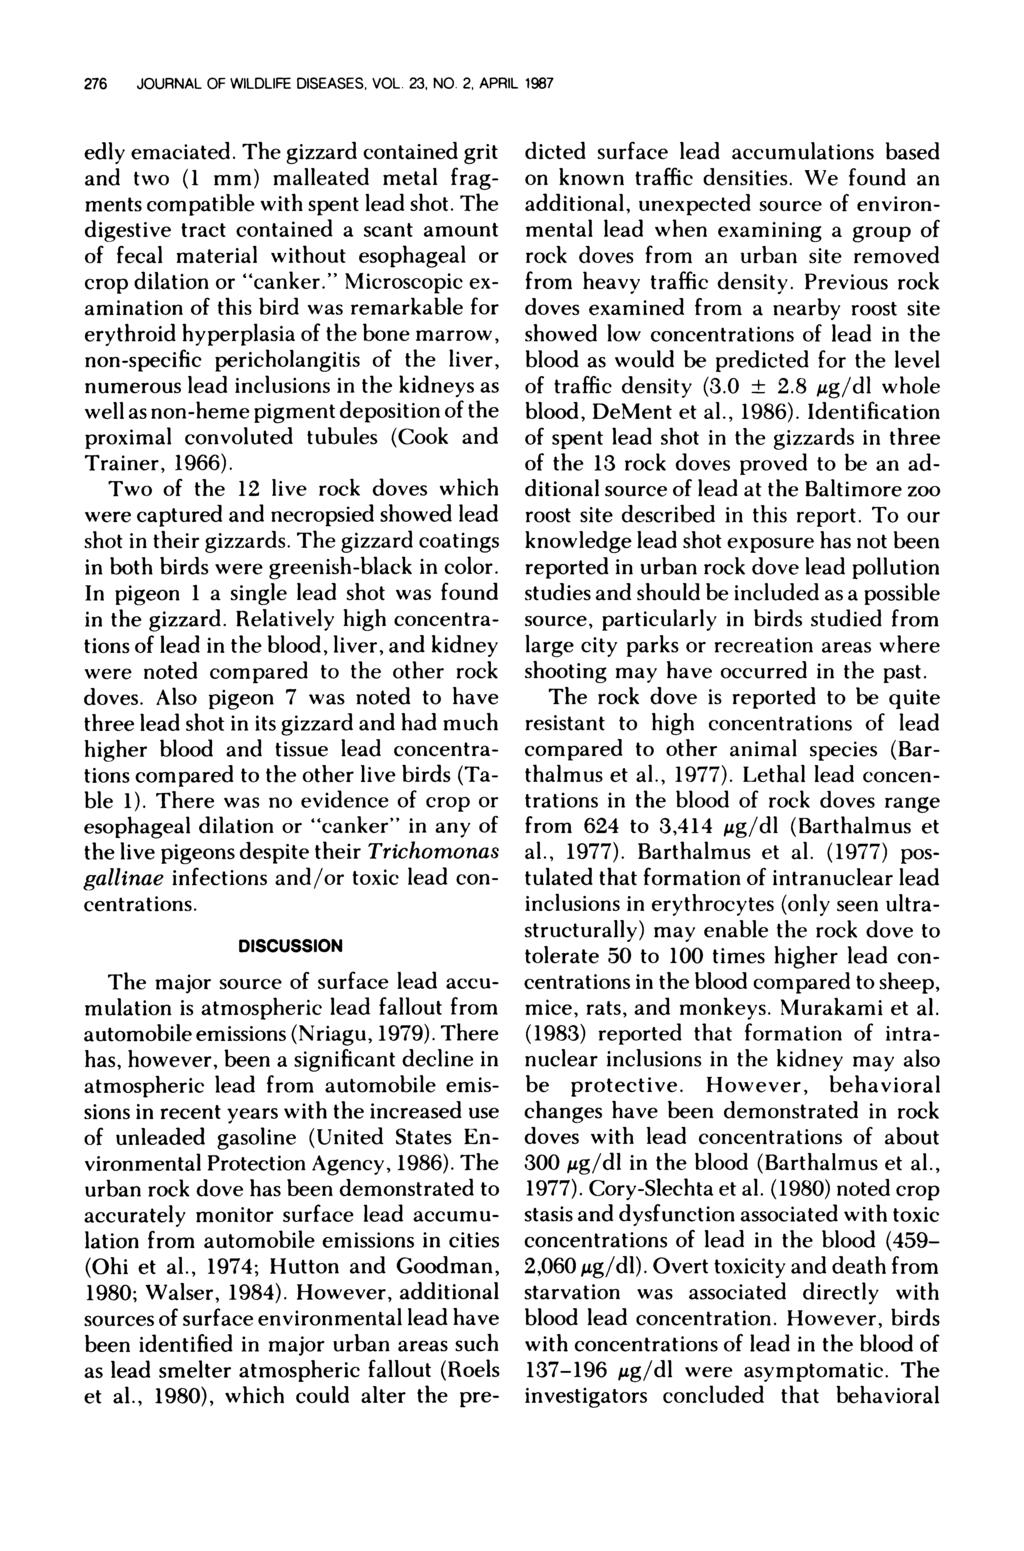 276 JOURNAL OF WILDLIFE DISEASES. VOL. 23, NO. 2, APRIL 1987 edly emaciated. The gizzard contained grit and two (1 mm) malleated metal fragments compatible with spent lead shot.